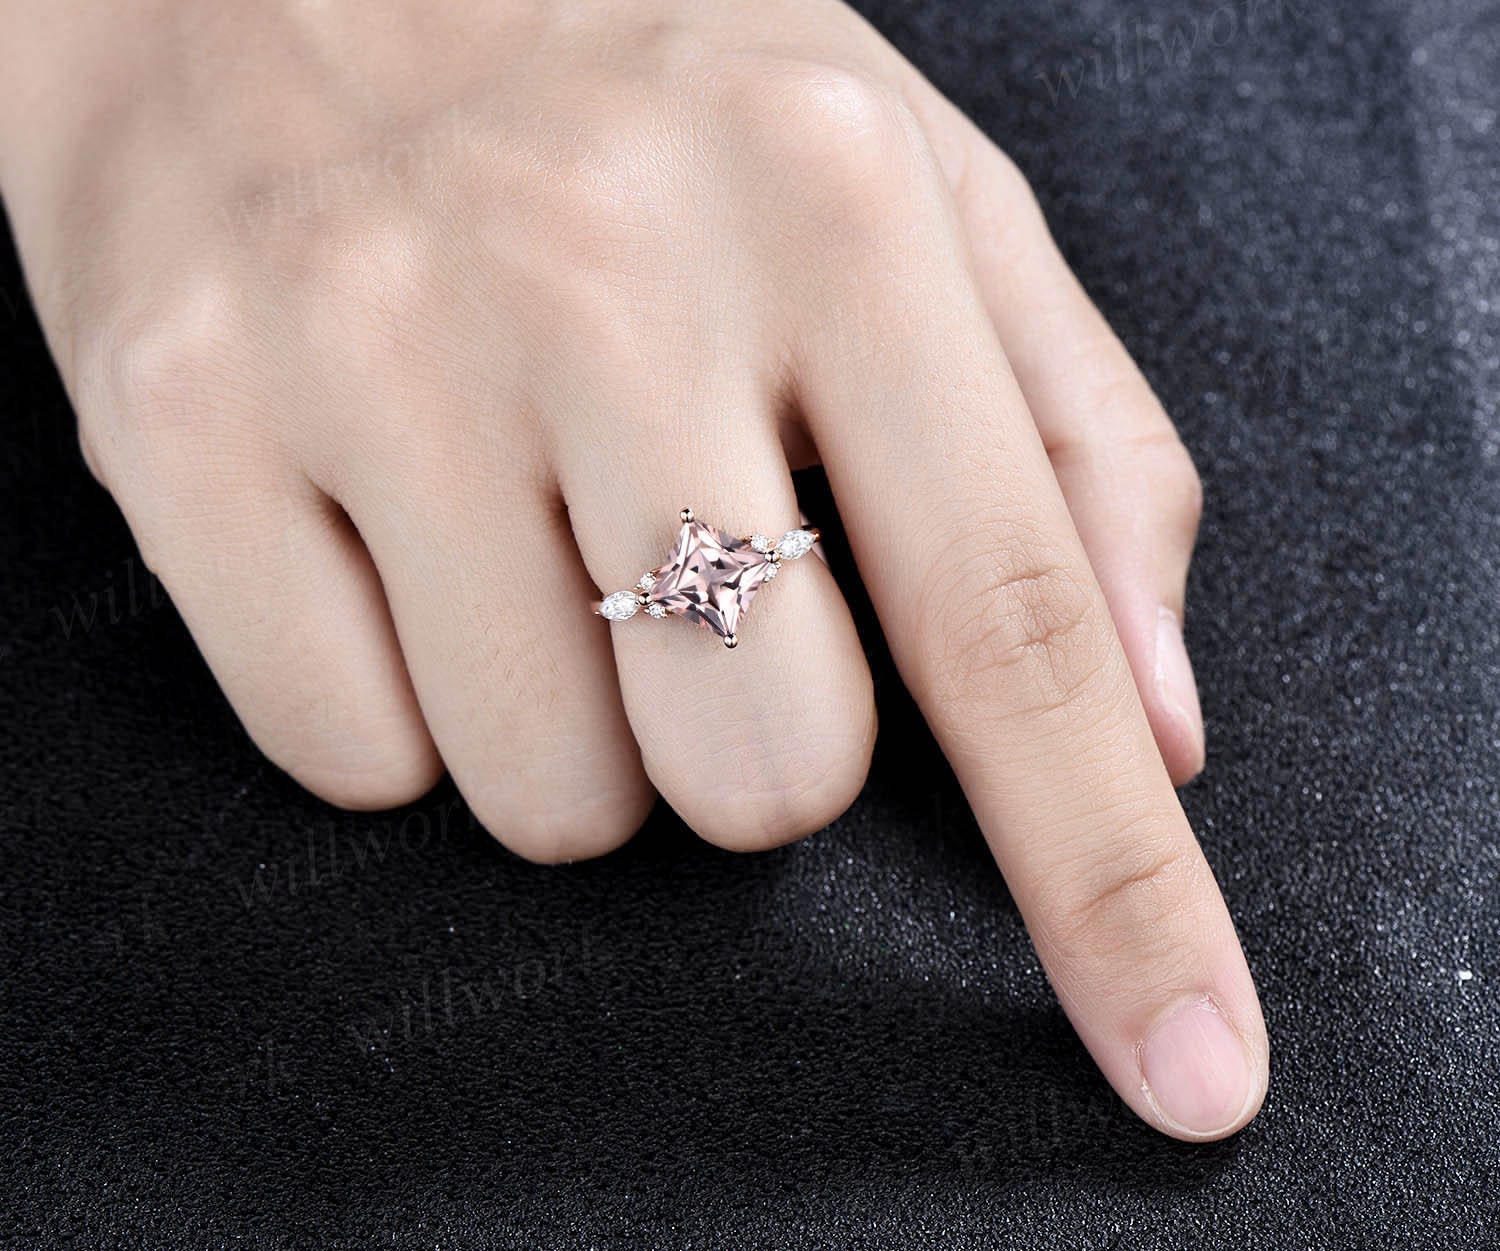 Yubnlvae Rings Finger Personalized Joint Simple Ring Design Set Ring Gift  10Piece Index Novel Ring Female Wild Rings Silver - Walmart.com